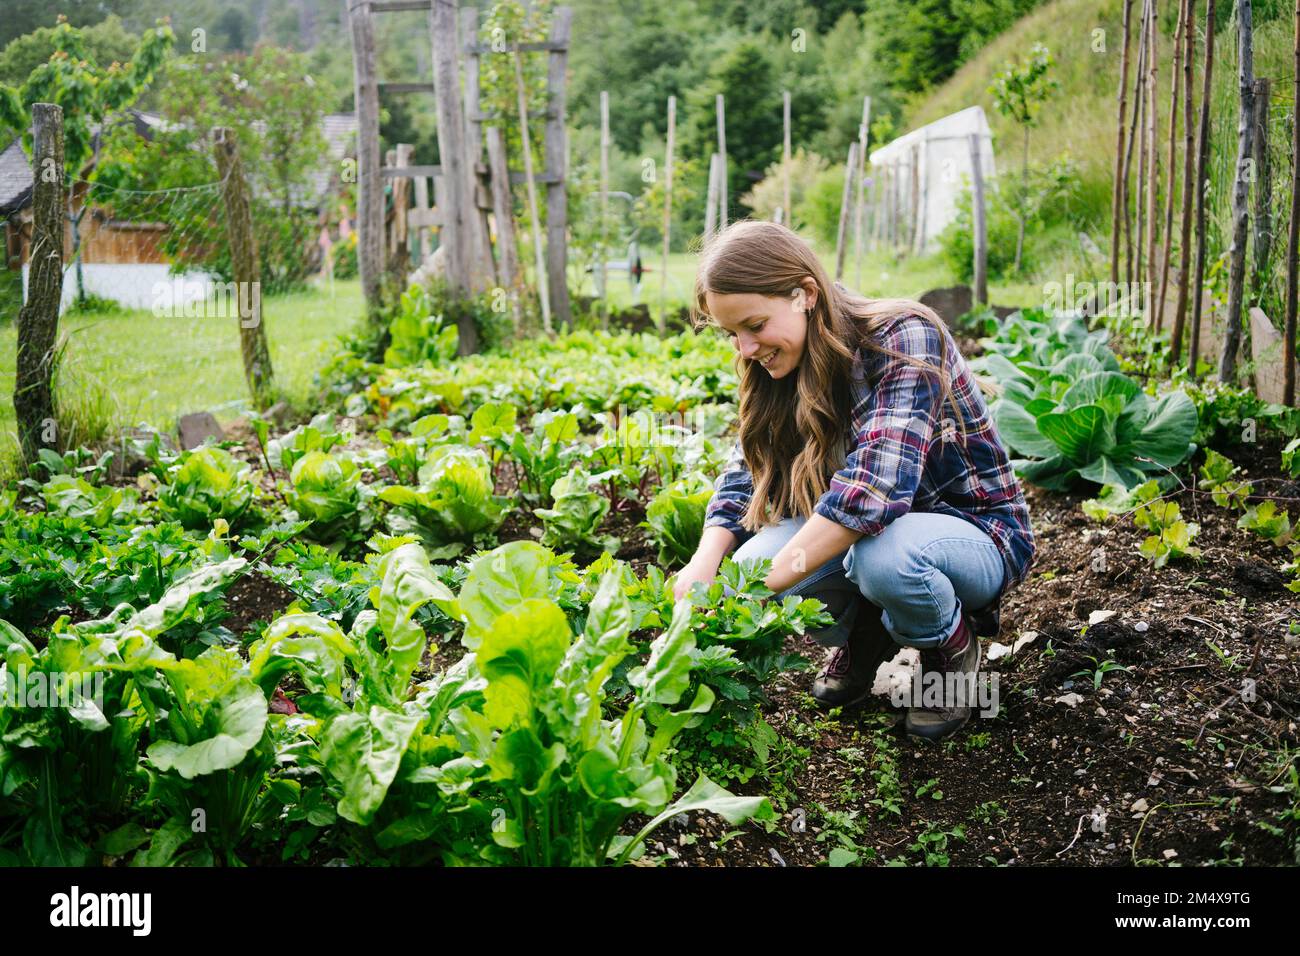 Smiling woman planting leaf vegetable in garden Stock Photo